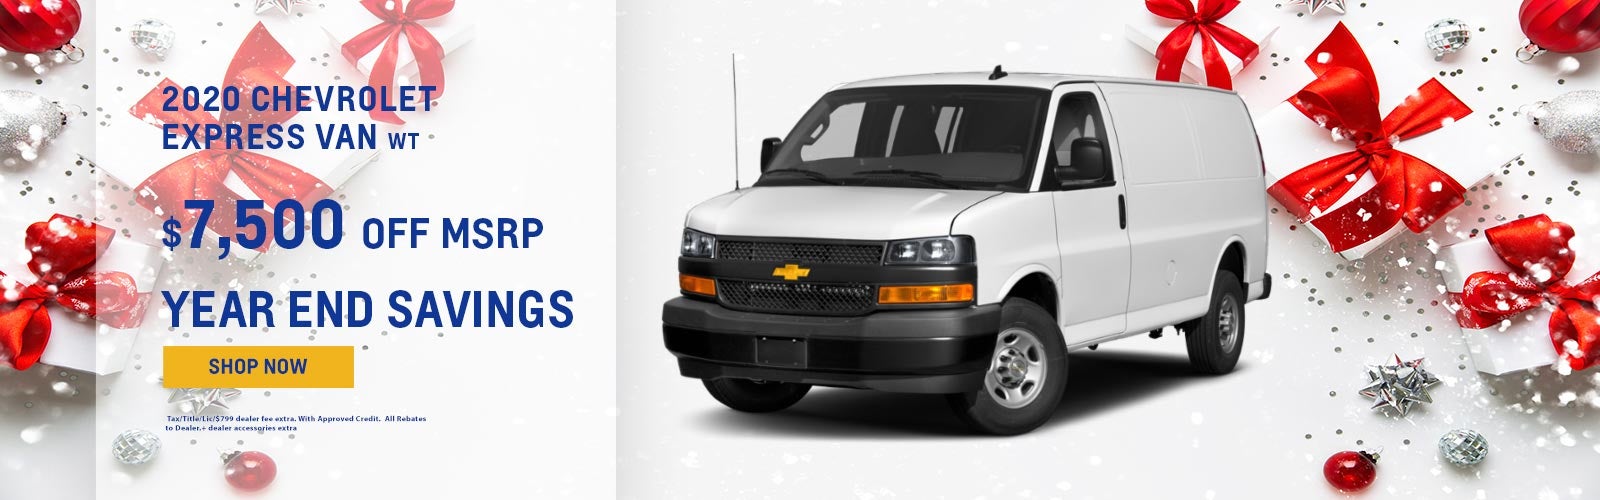 2020 Chevy Express Van Special Offer